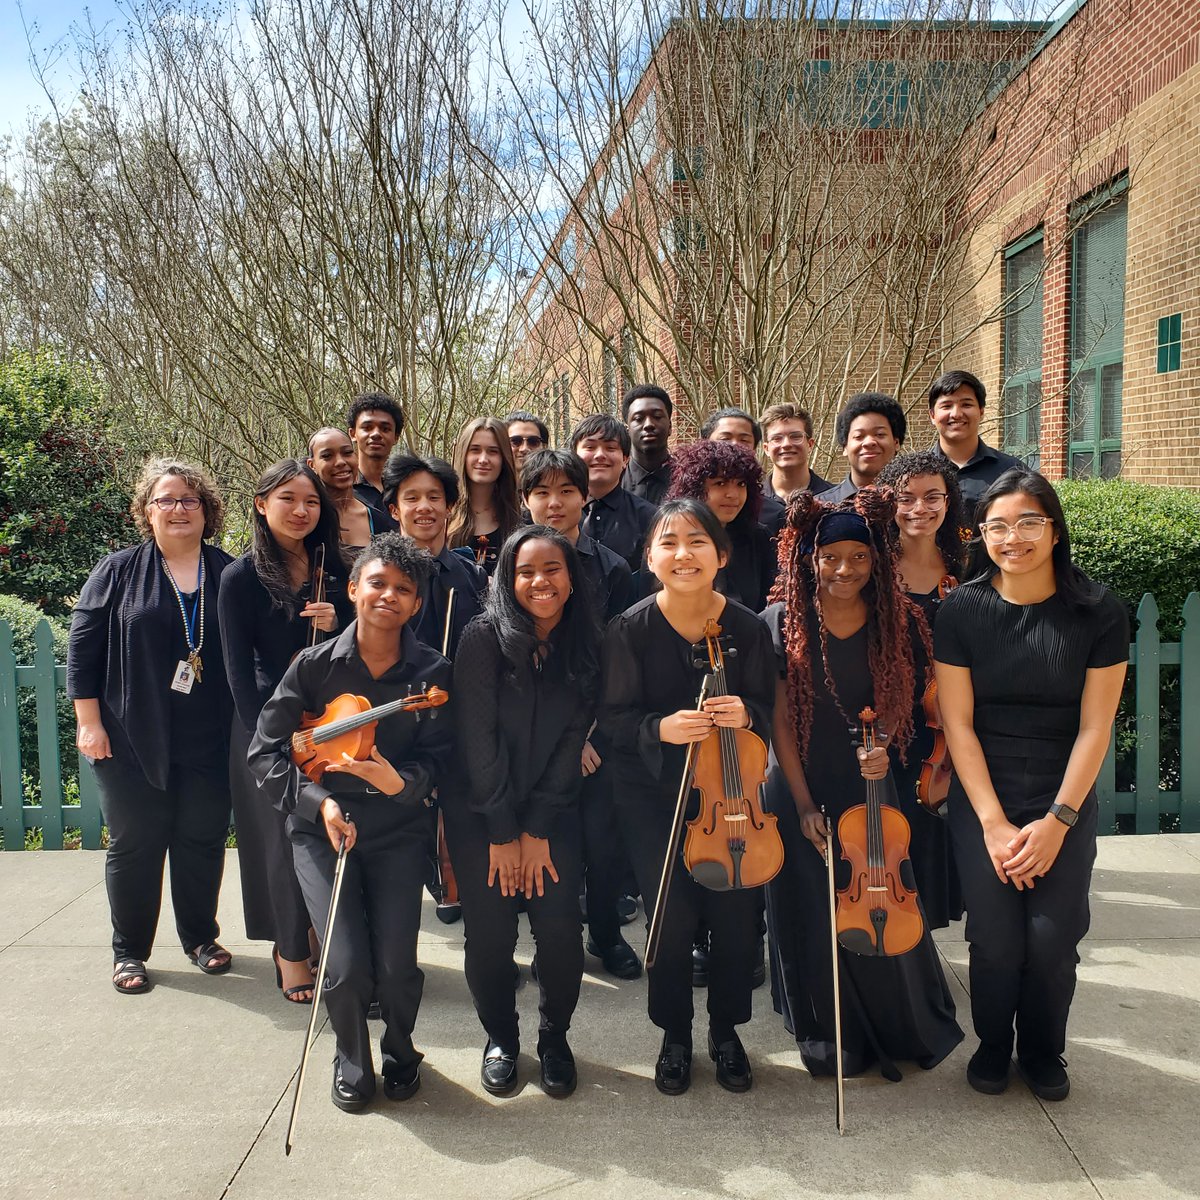 Congrats to the JBHS  Chamber Orchestra for earning straight superiors at the NC Music Performance Assessment Festival!